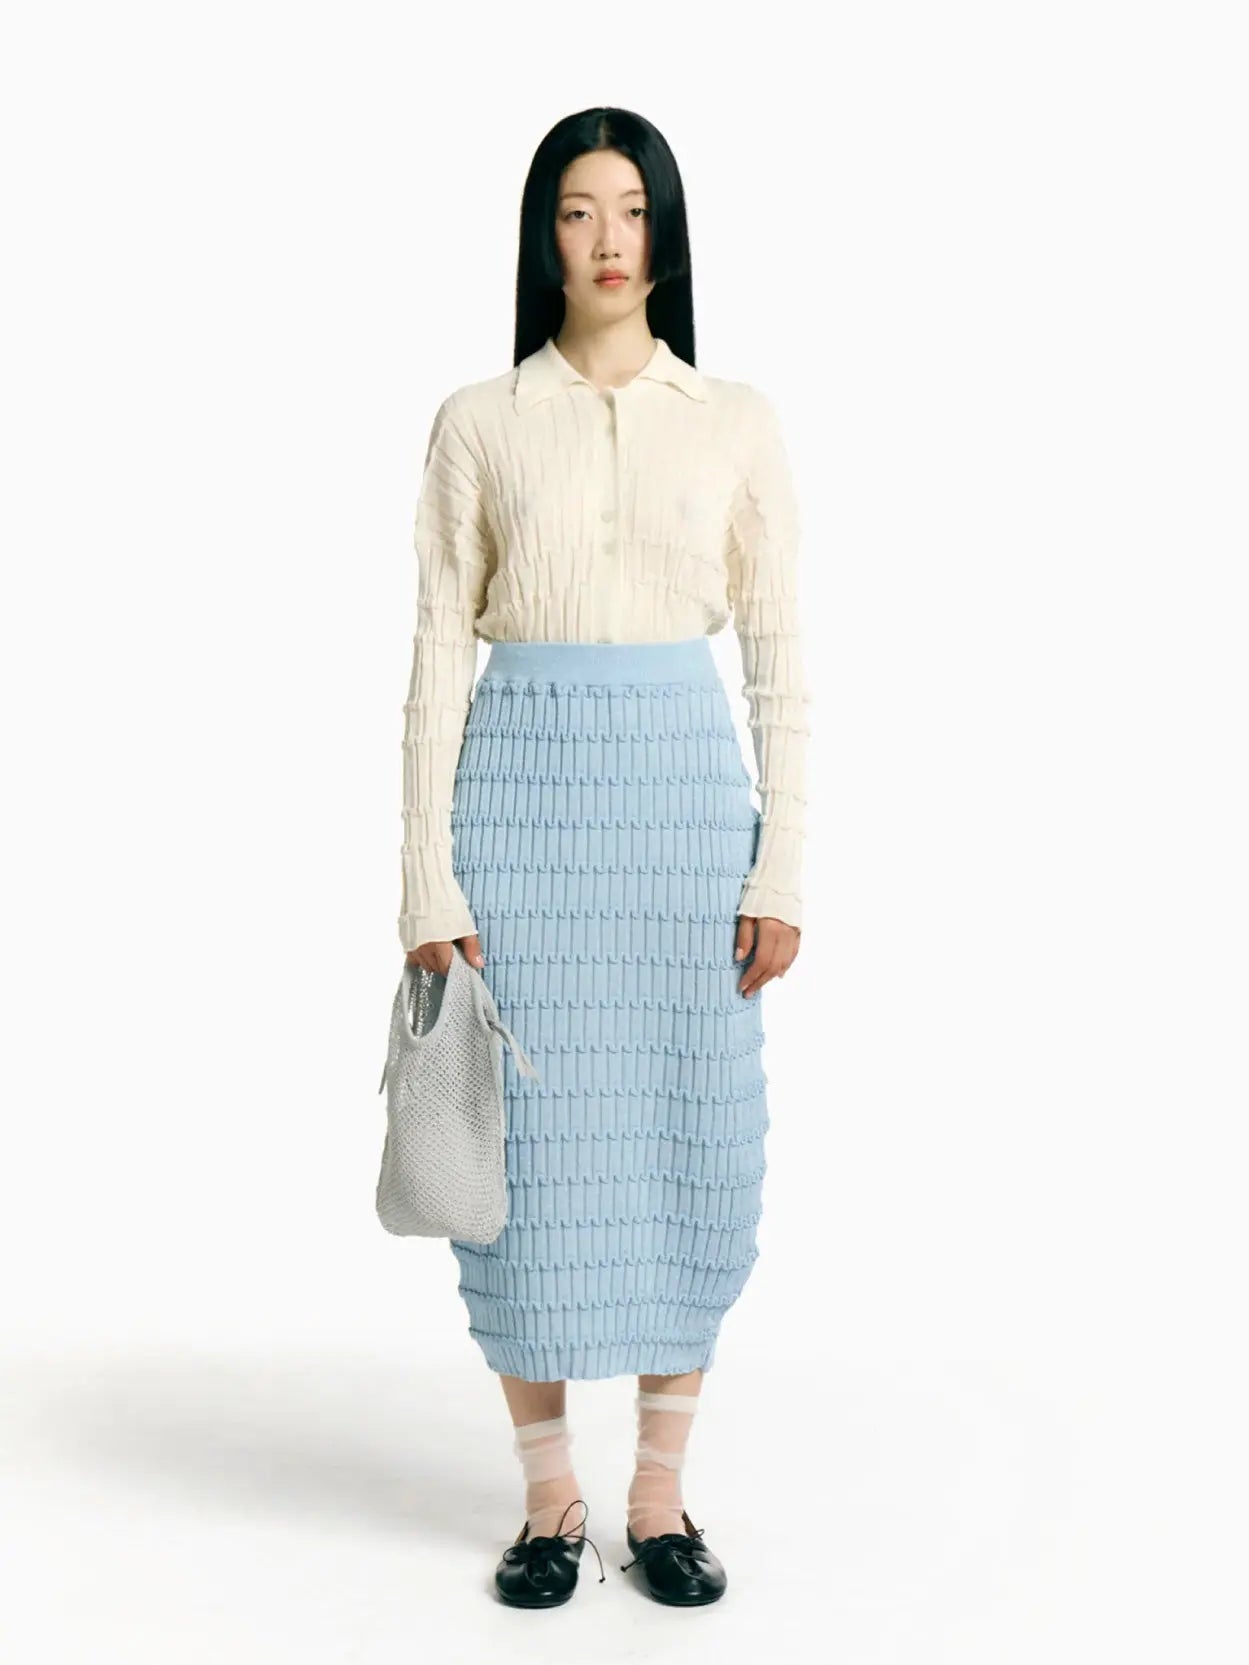 A Rus Mizuki Skirt Light Blue, knitted with a ribbed, wavy texture pattern from Bassalstore. The form-fitting skirt features an elastic waistband for a snug fit and boasts a knee-length design, displayed beautifully on a plain white background. Perfect for your next visit to Barcelona!